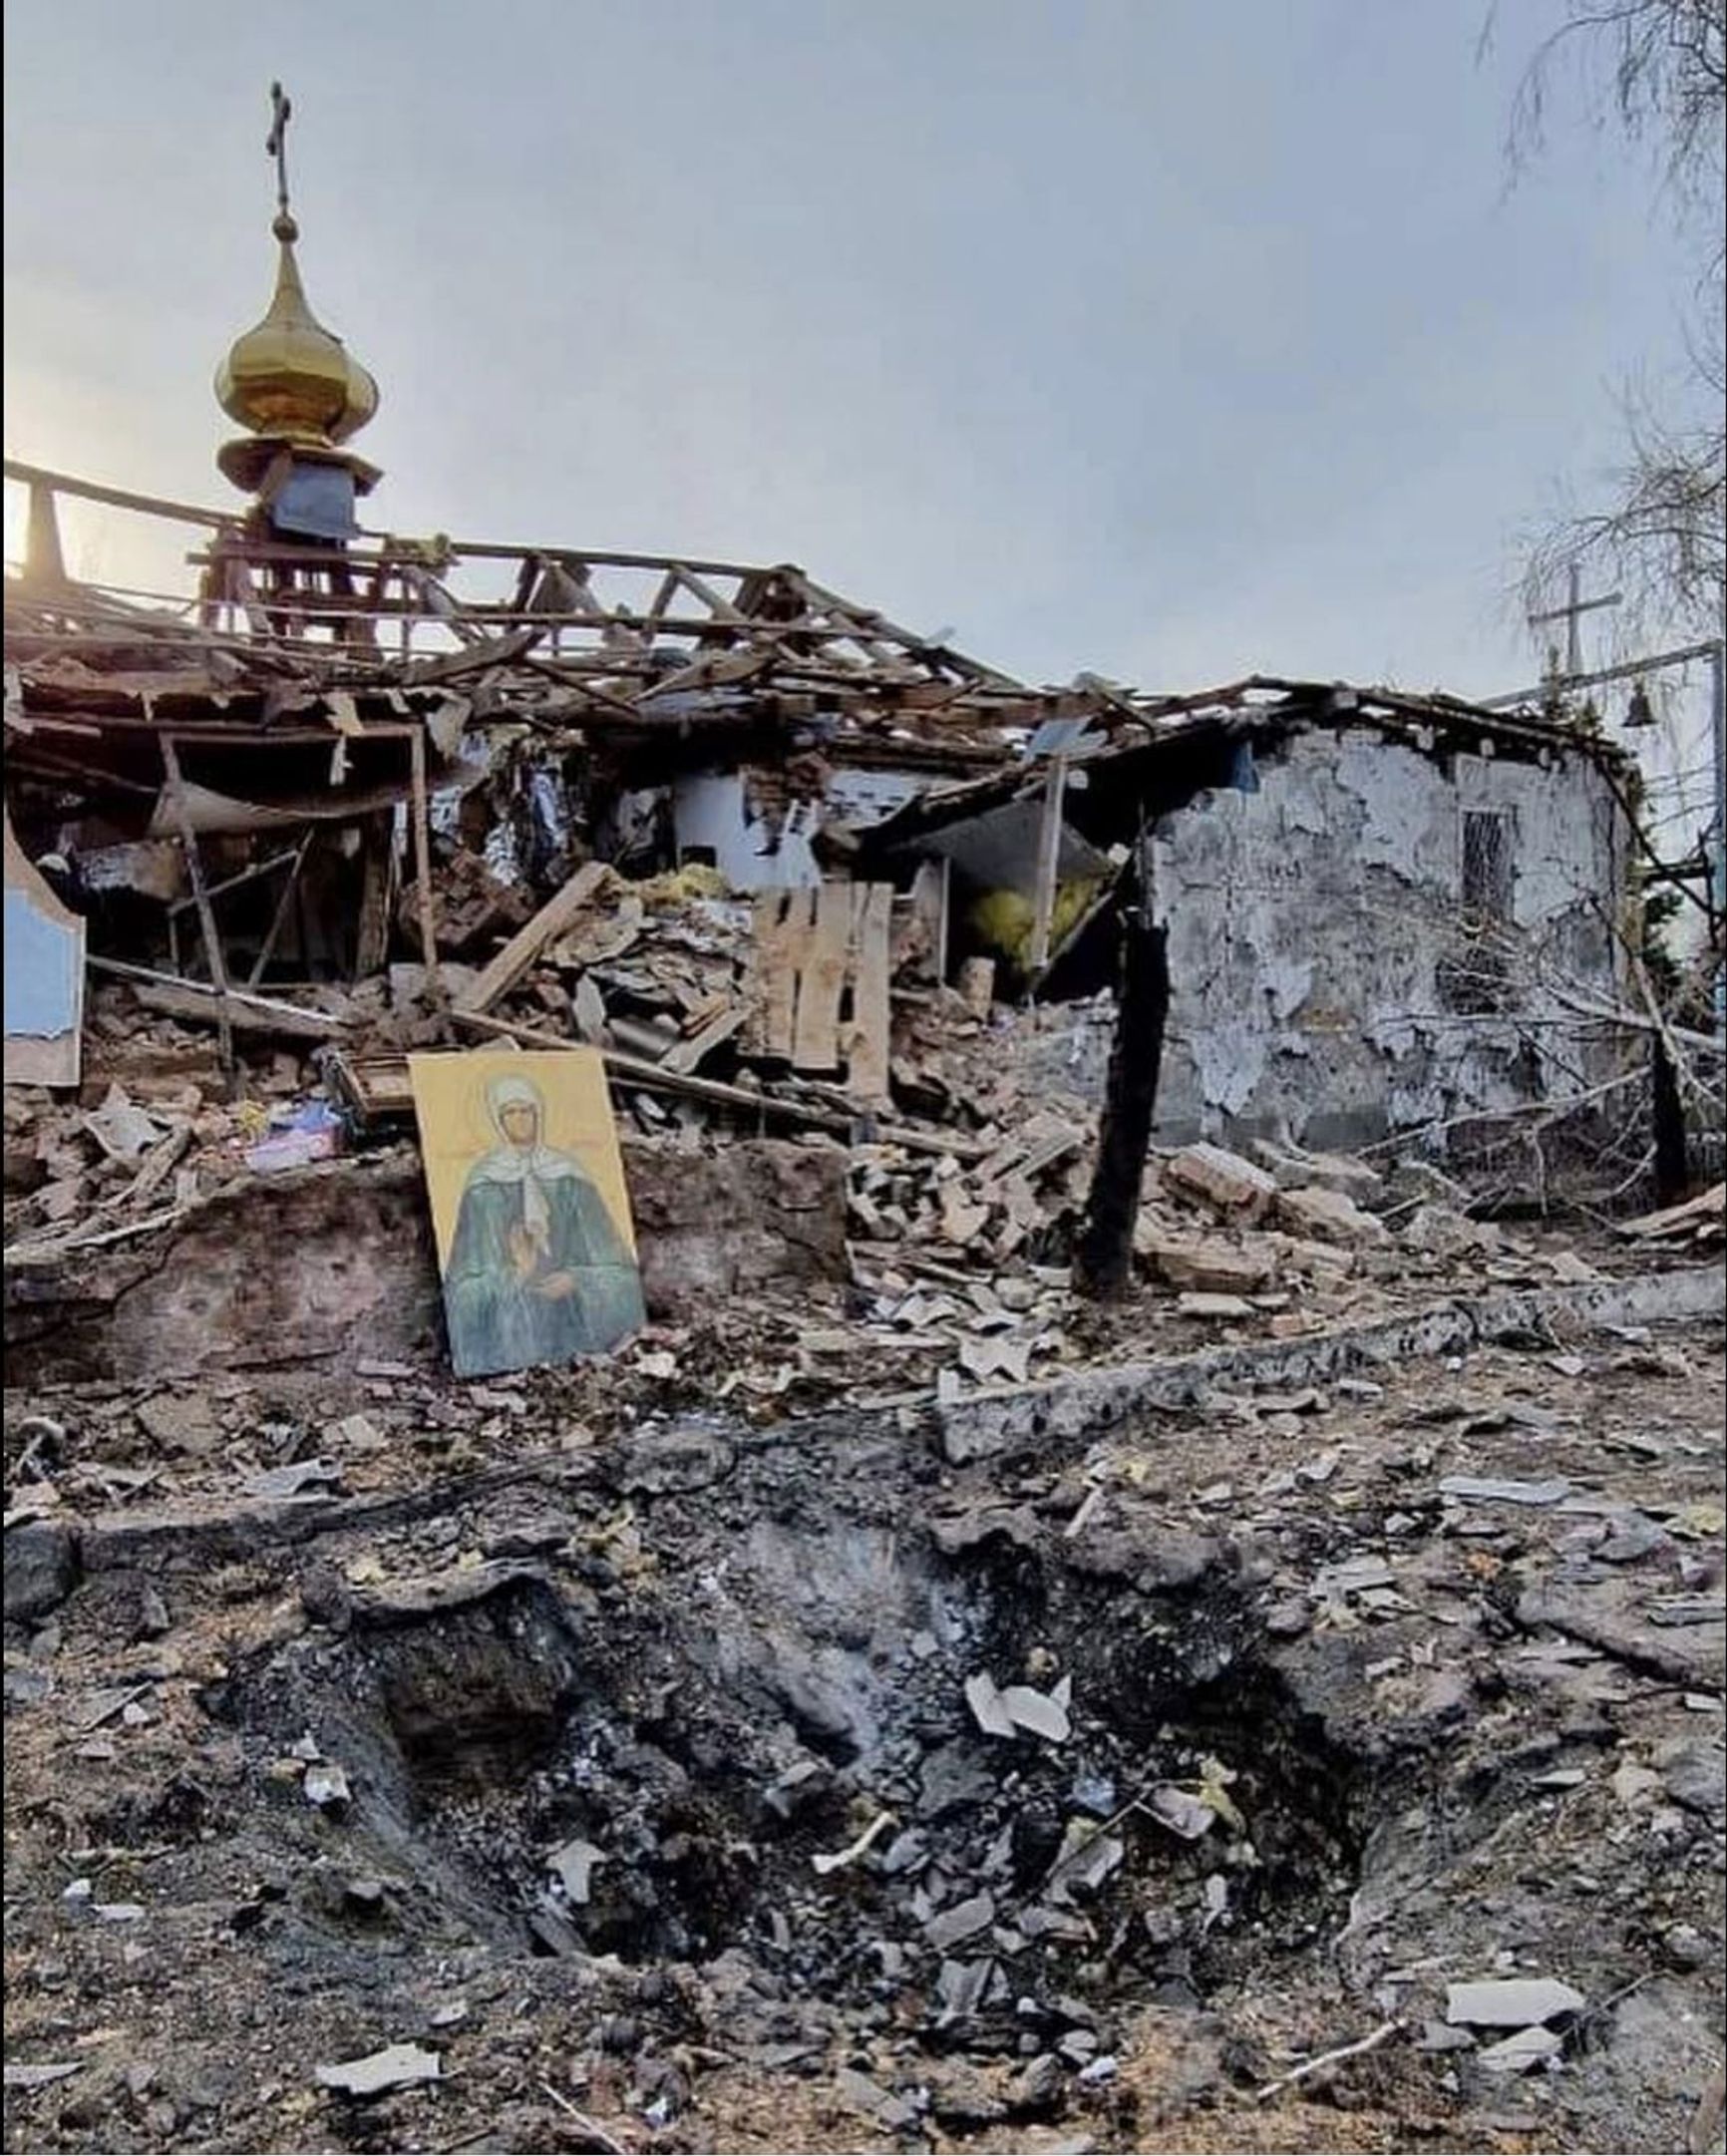 The Church of St. Archangel Michael in the village of Komyshuvakha in the Zaporizhzhia region, destroyed by Russian troops on Easter eve on the night of April 16, 2023